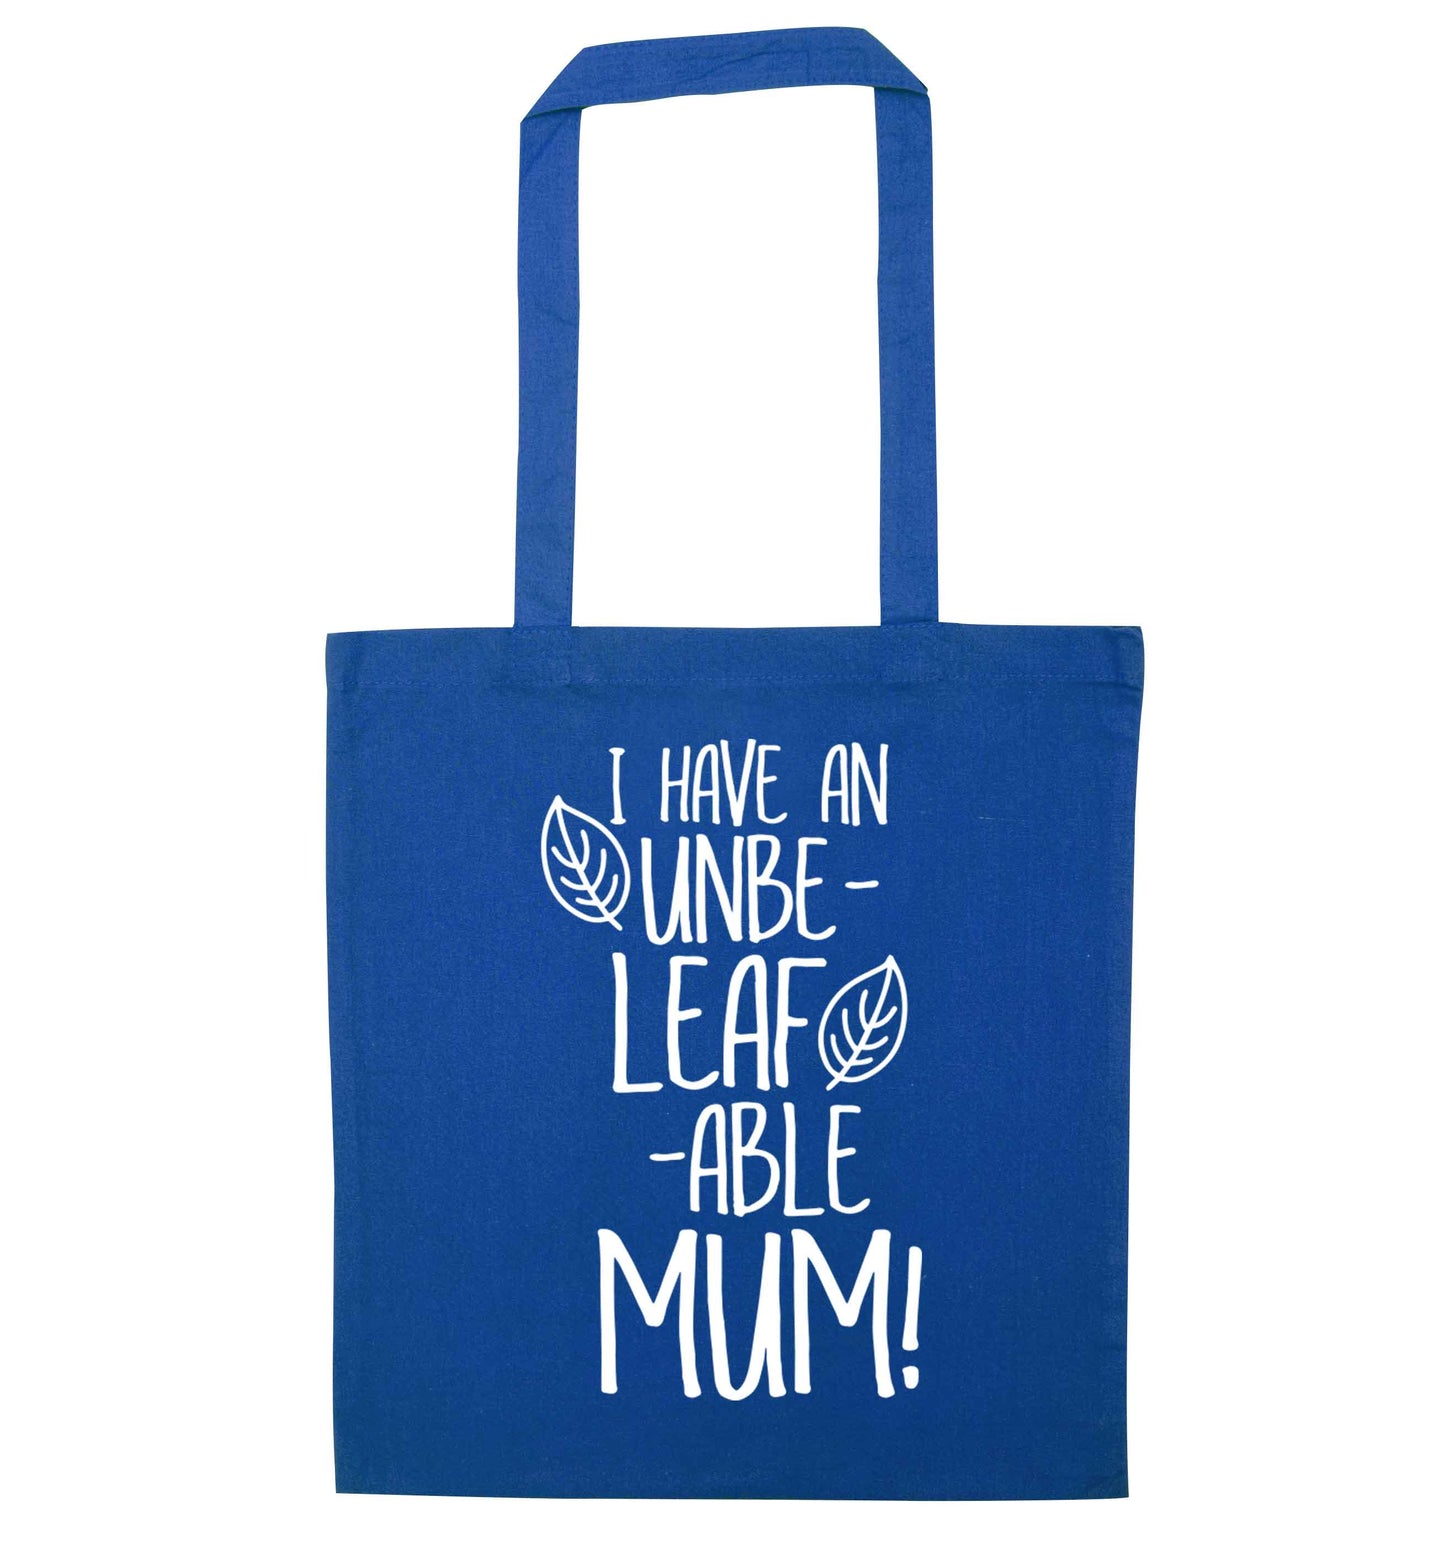 I have an unbeleafable mum! blue tote bag